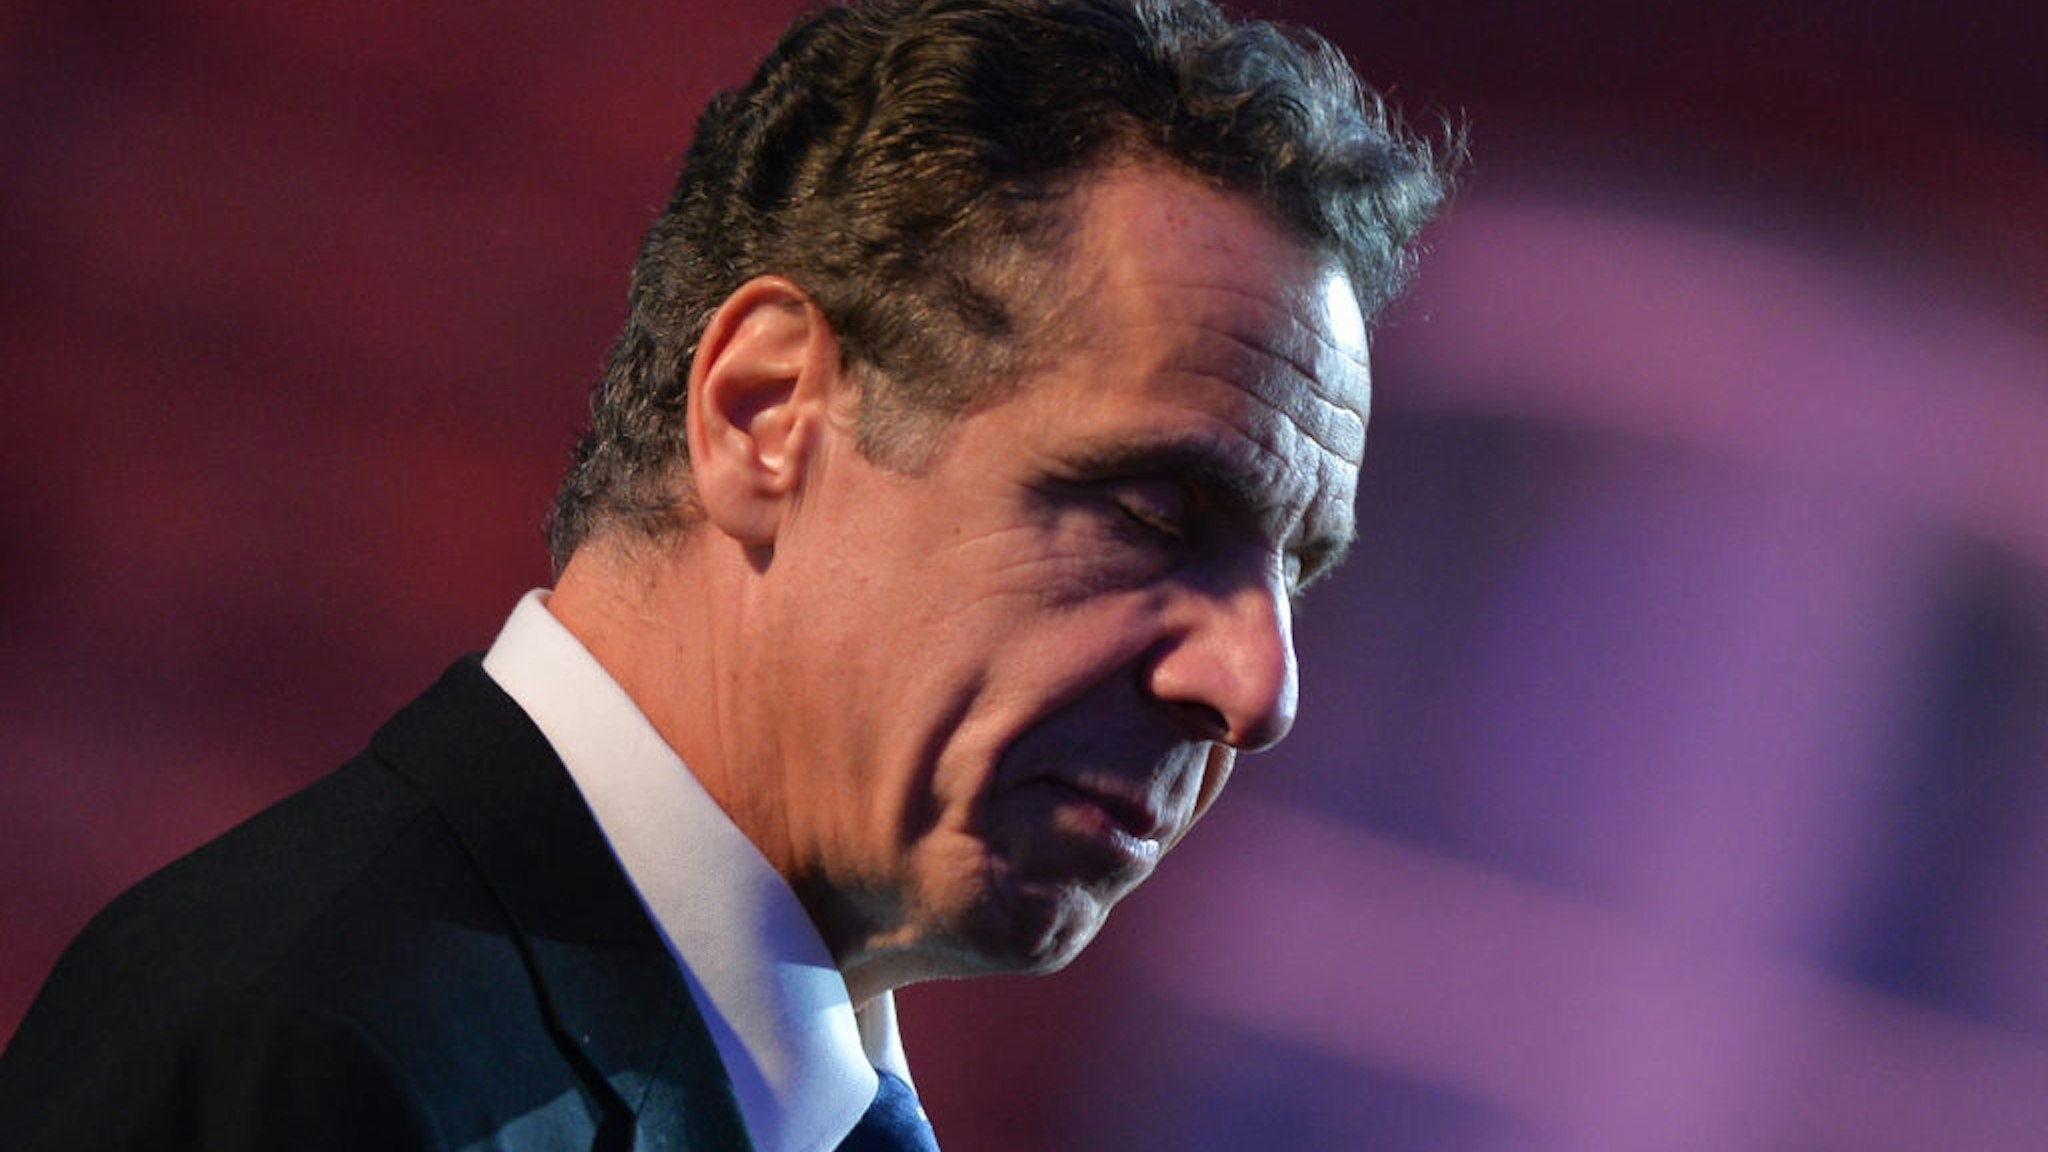 A file picture of Andrew Cuomo, Governor of New York, taken on January 27 in Poland.Chris Cuomo, a CNN anchor and the youngest brother of NY Governor Andrew Cuomo, has tested positive for coronavirus. On Tuesday, March 31, 2020, in Krakow, Poland. (Photo by Artur Widak/NurPhoto via Getty Images)